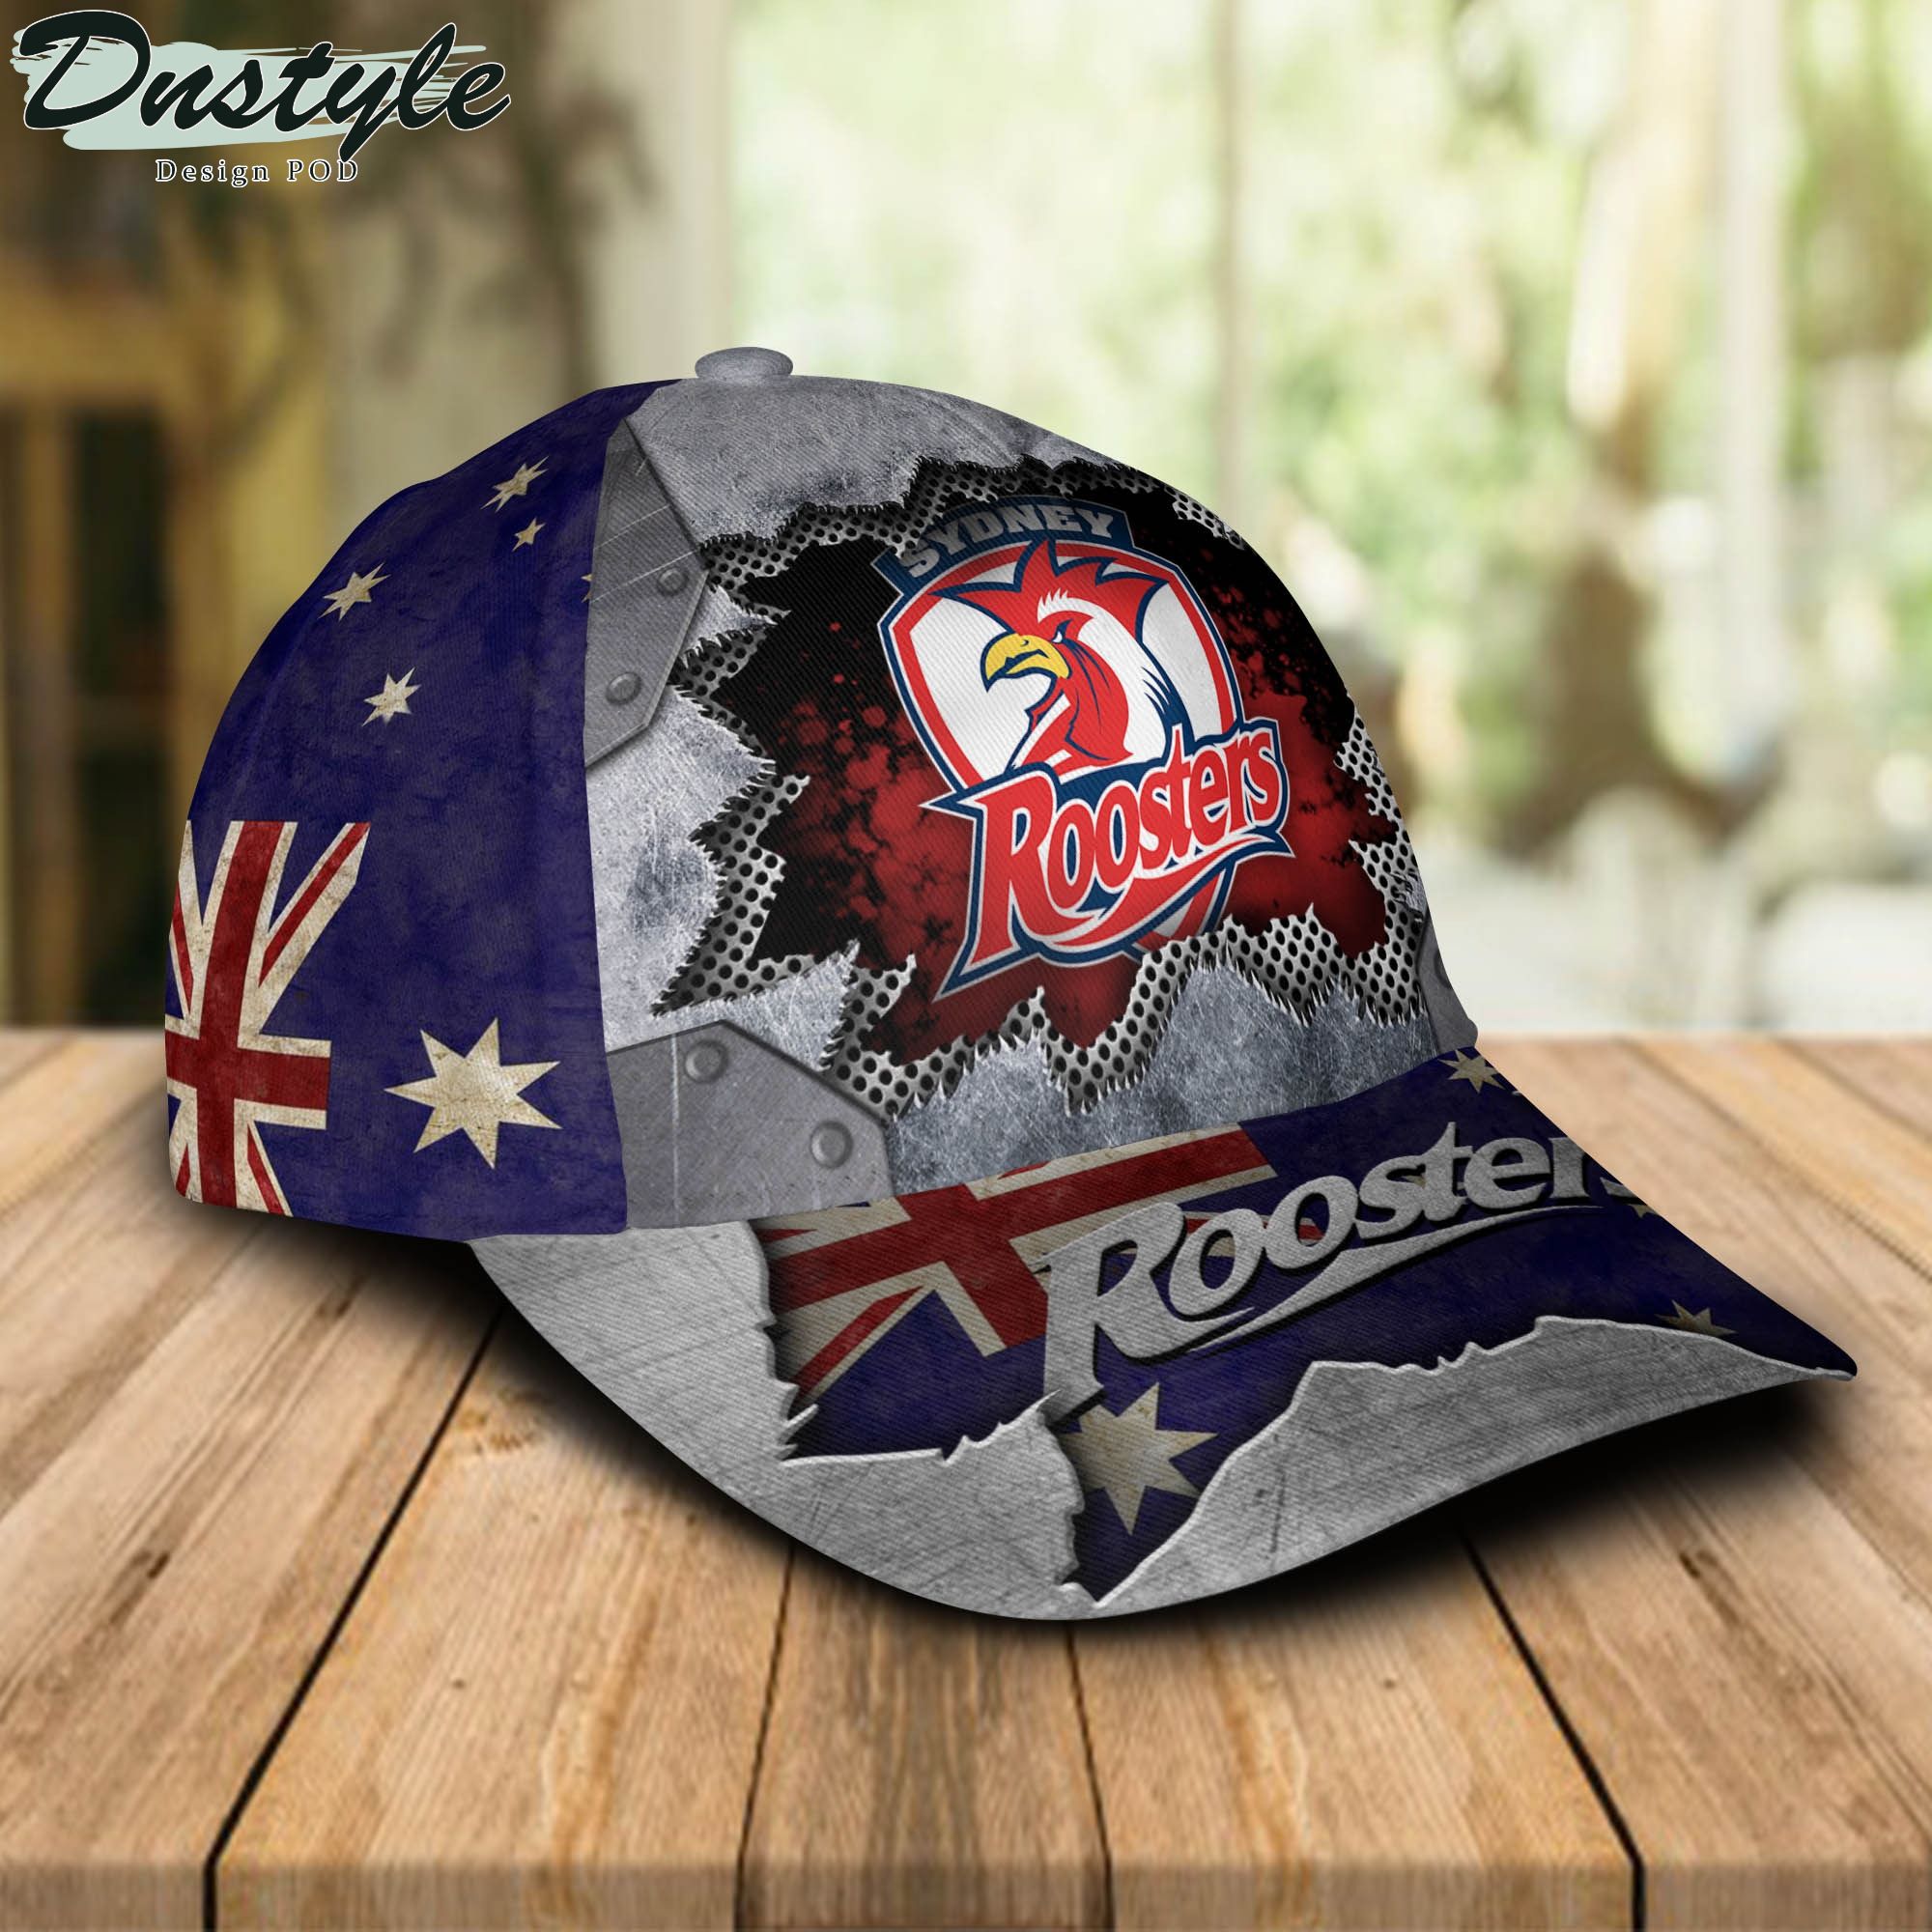 Sydney Roosters Classic Cap